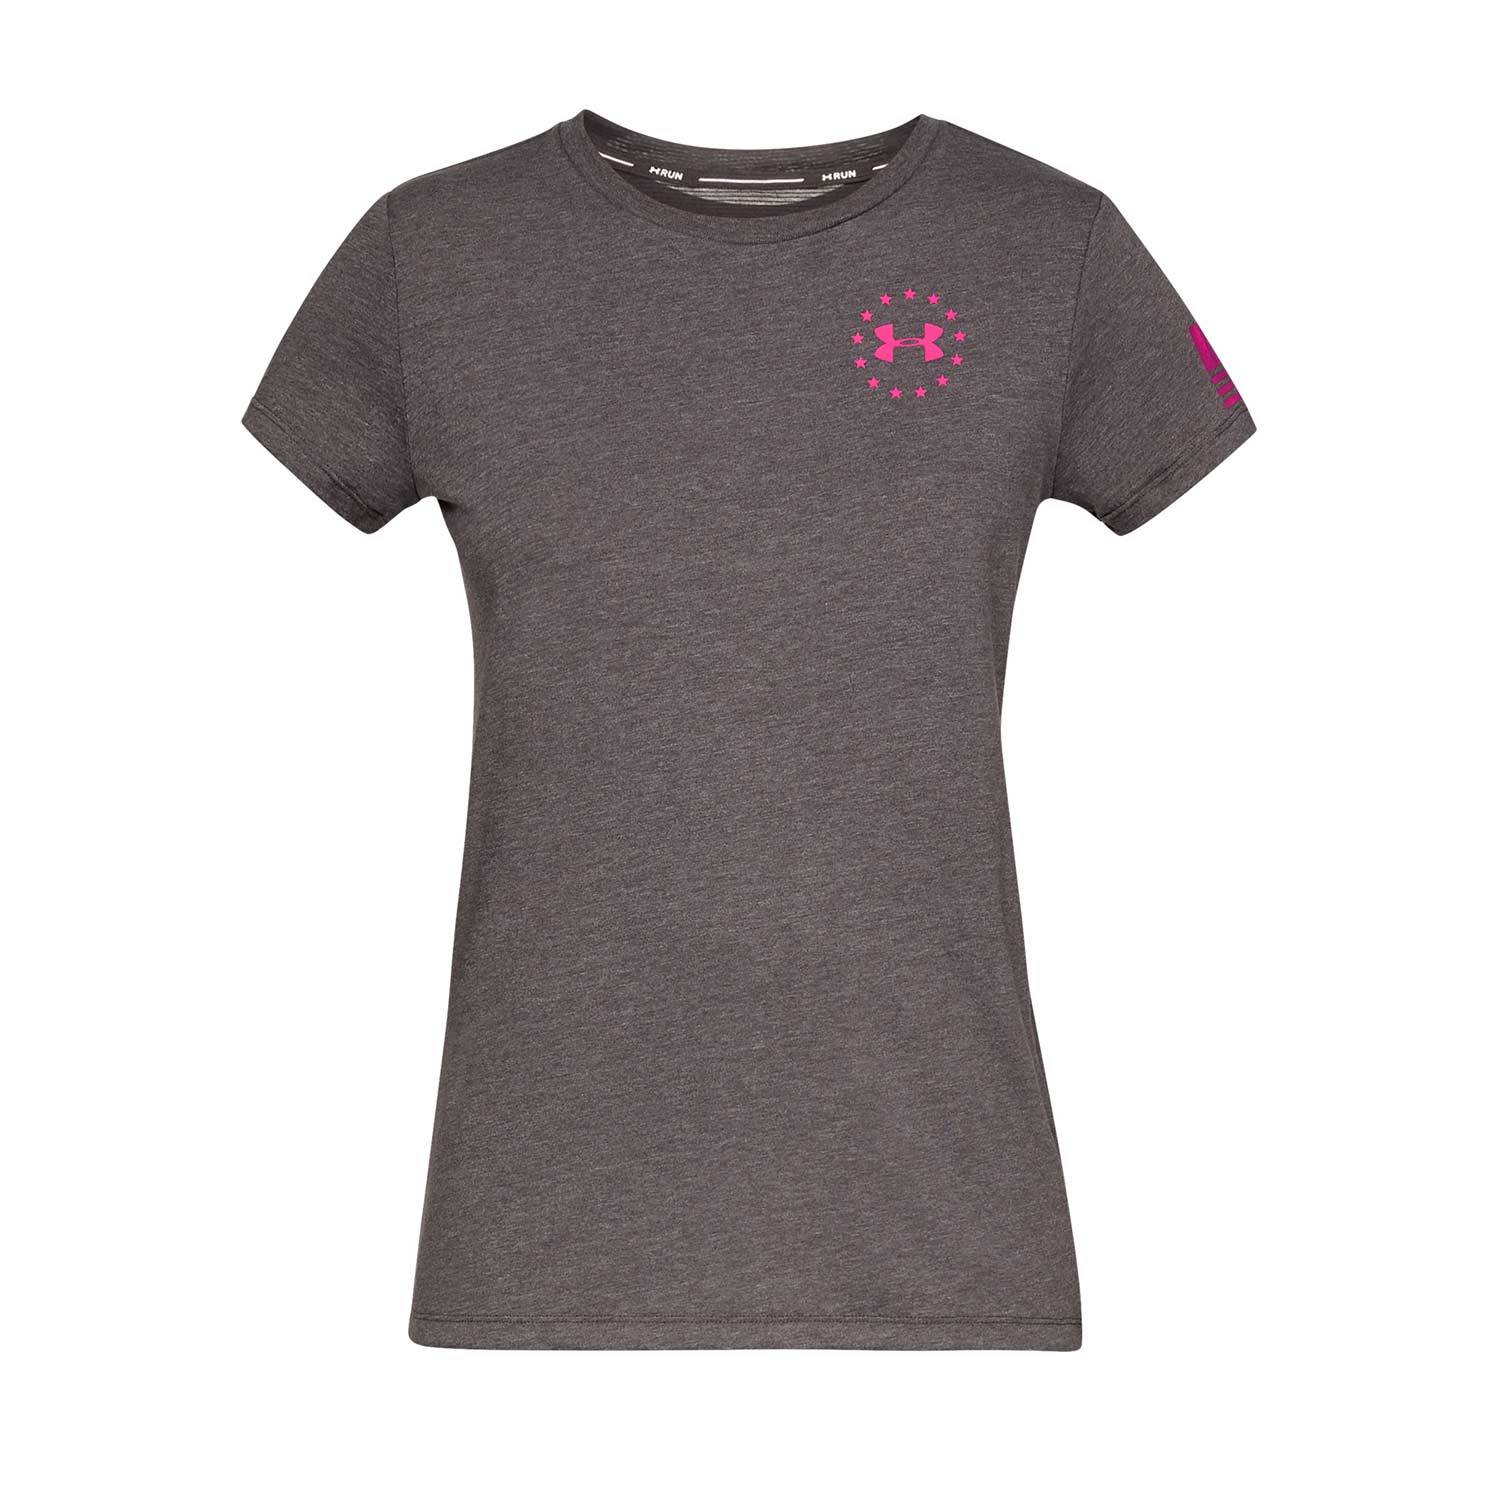 UNDER ARMOUR WOMEN’S FREEDOM FLAG T-SHIRT